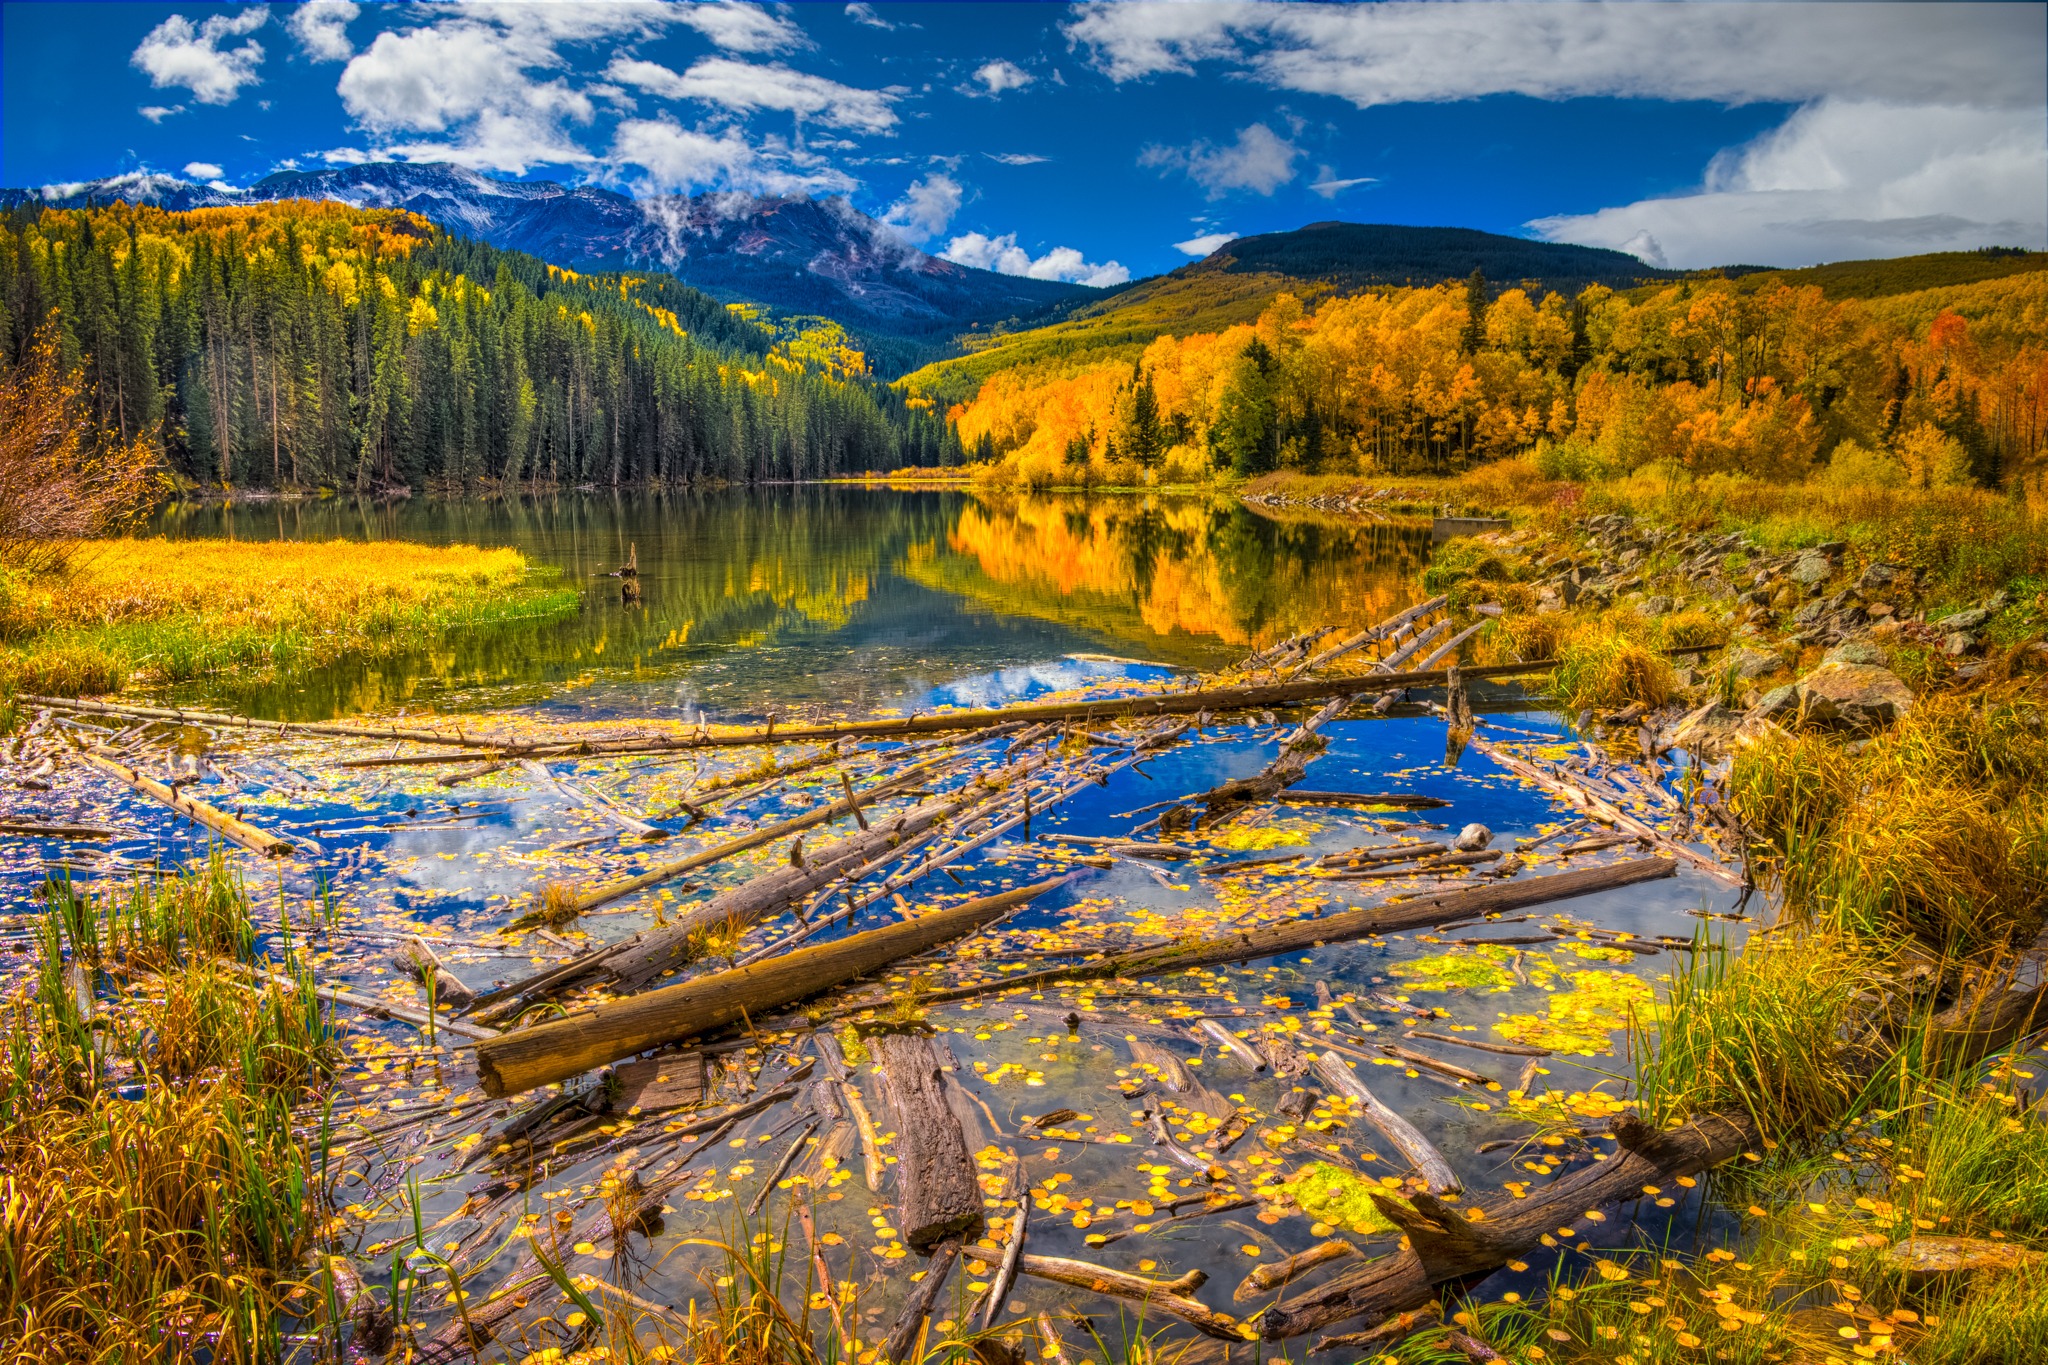 Aspen leaves float on the surface of Woods Lake, at the end of Fall Creek Road, near Telluride, Colorado.